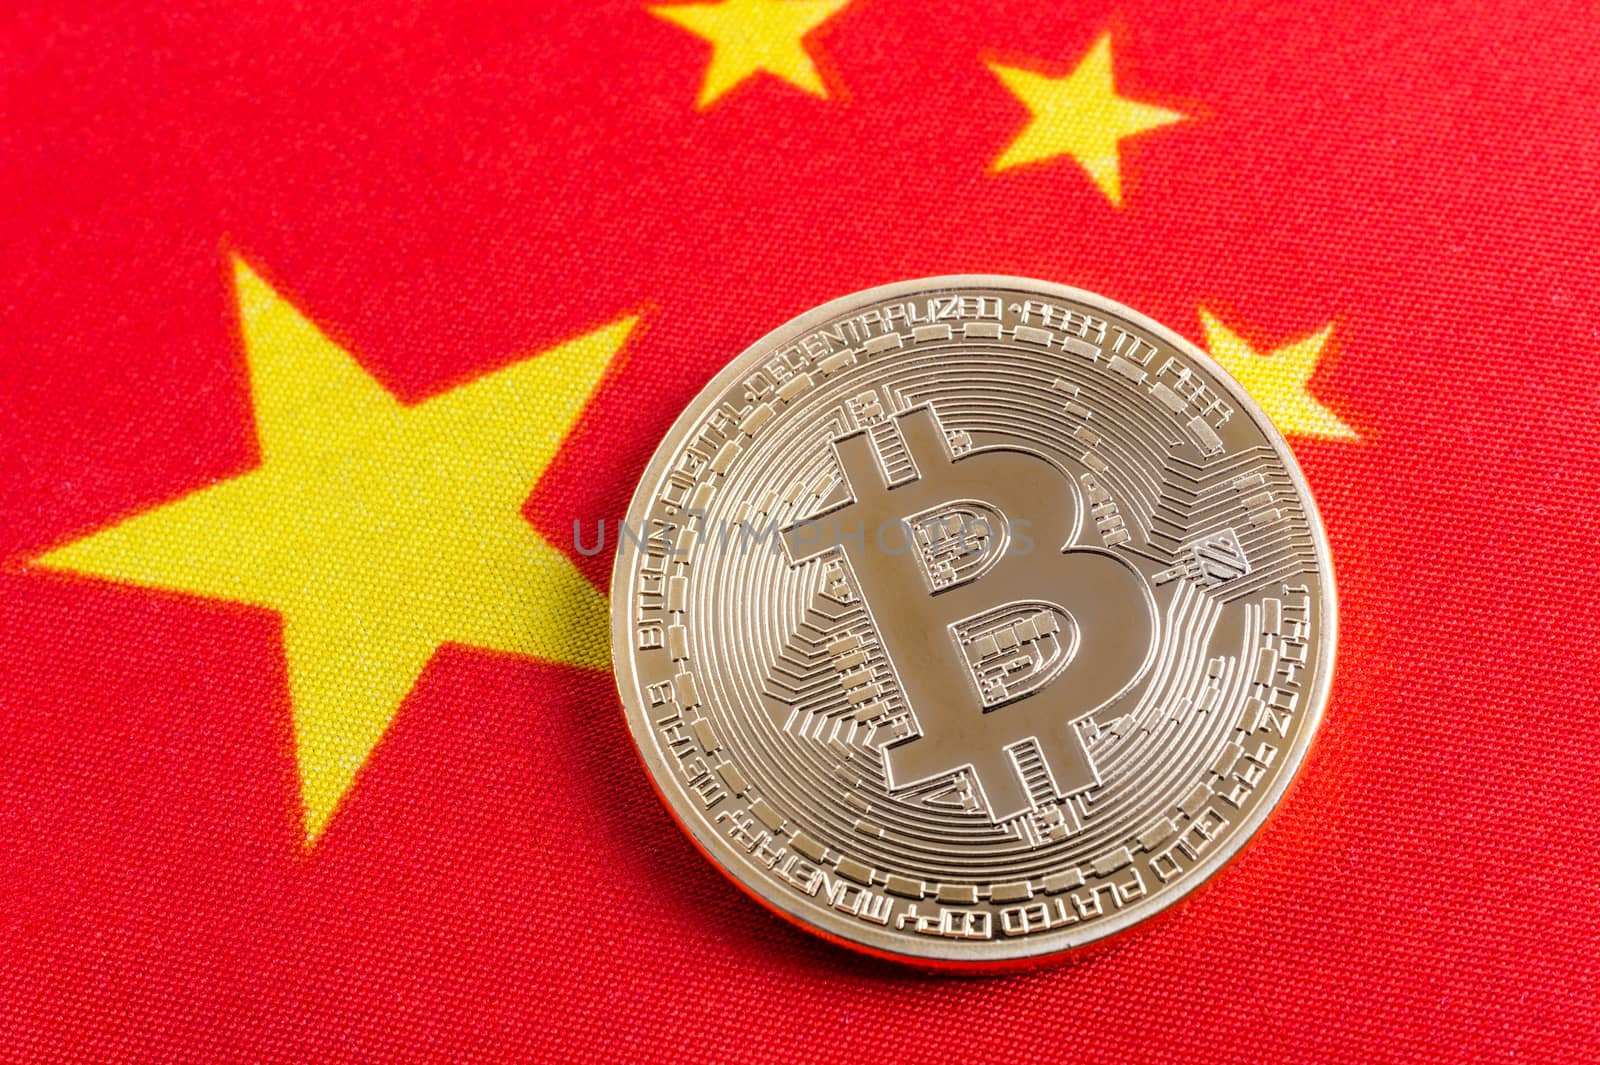 Bitcoin real coin over chinese flag fabric by mbruxelle